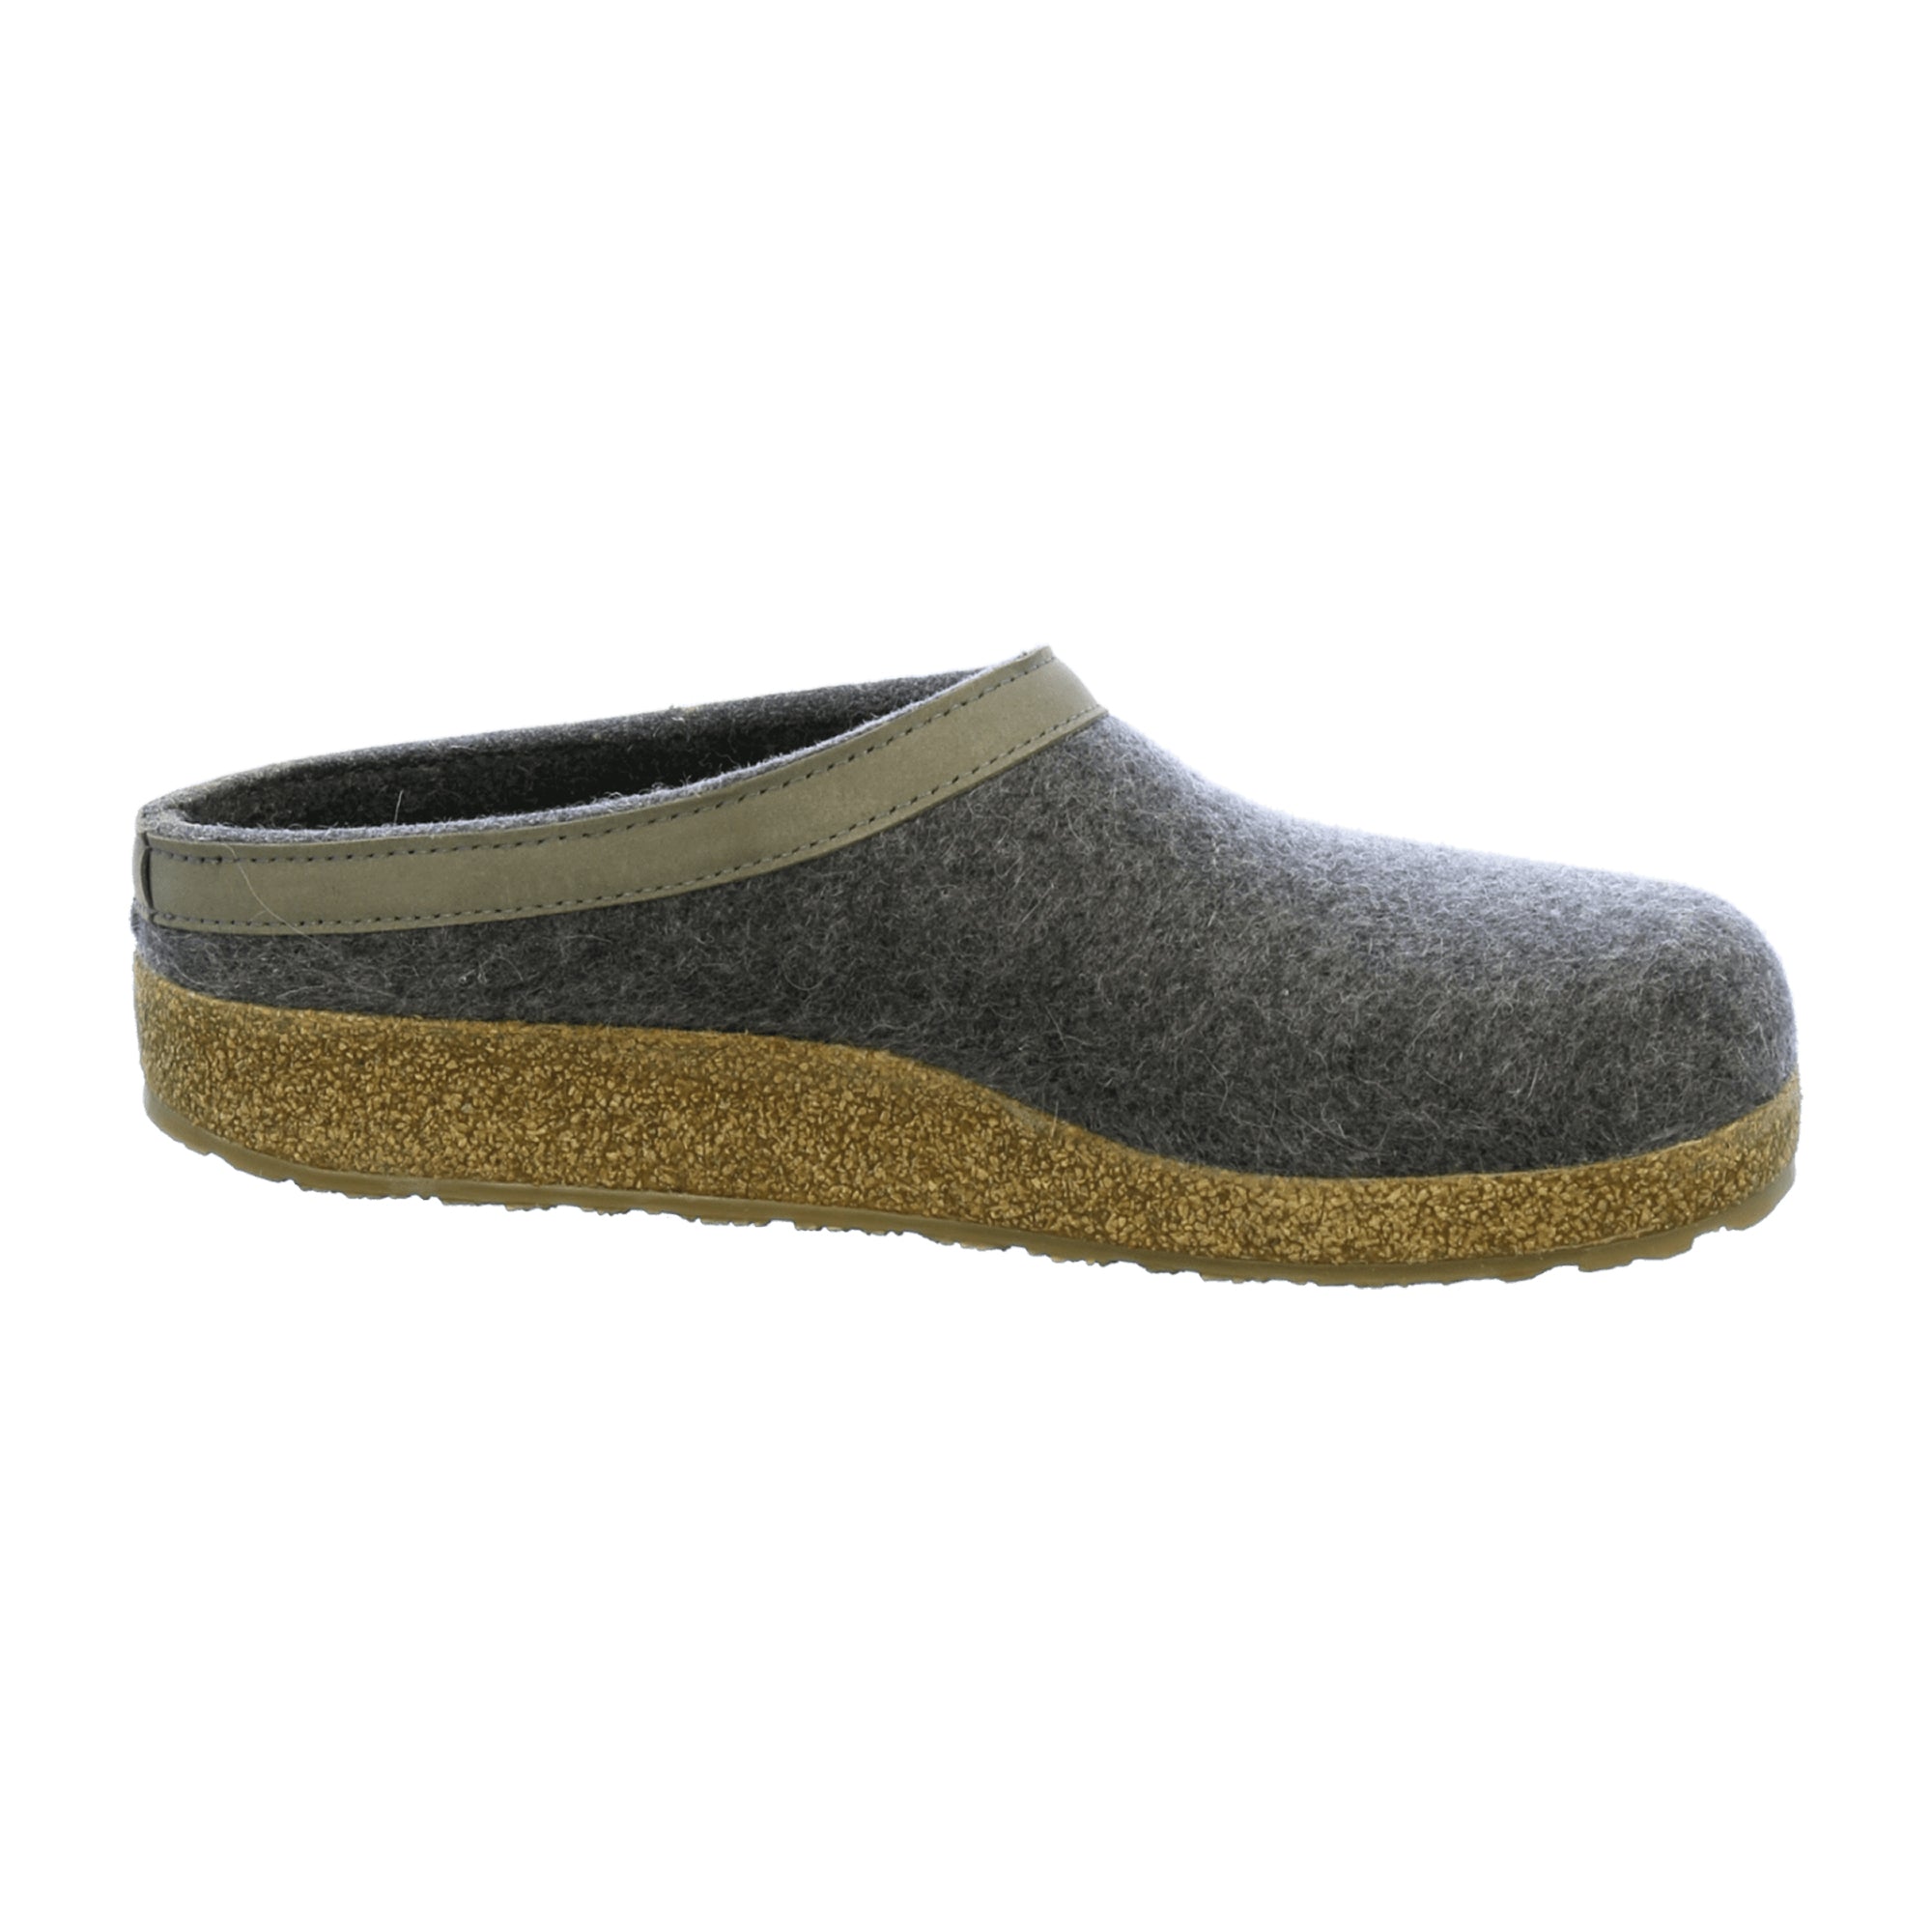 Haflinger Grizzly Torben Anthracite Men's Slippers in Grey | Cozy & Stylish